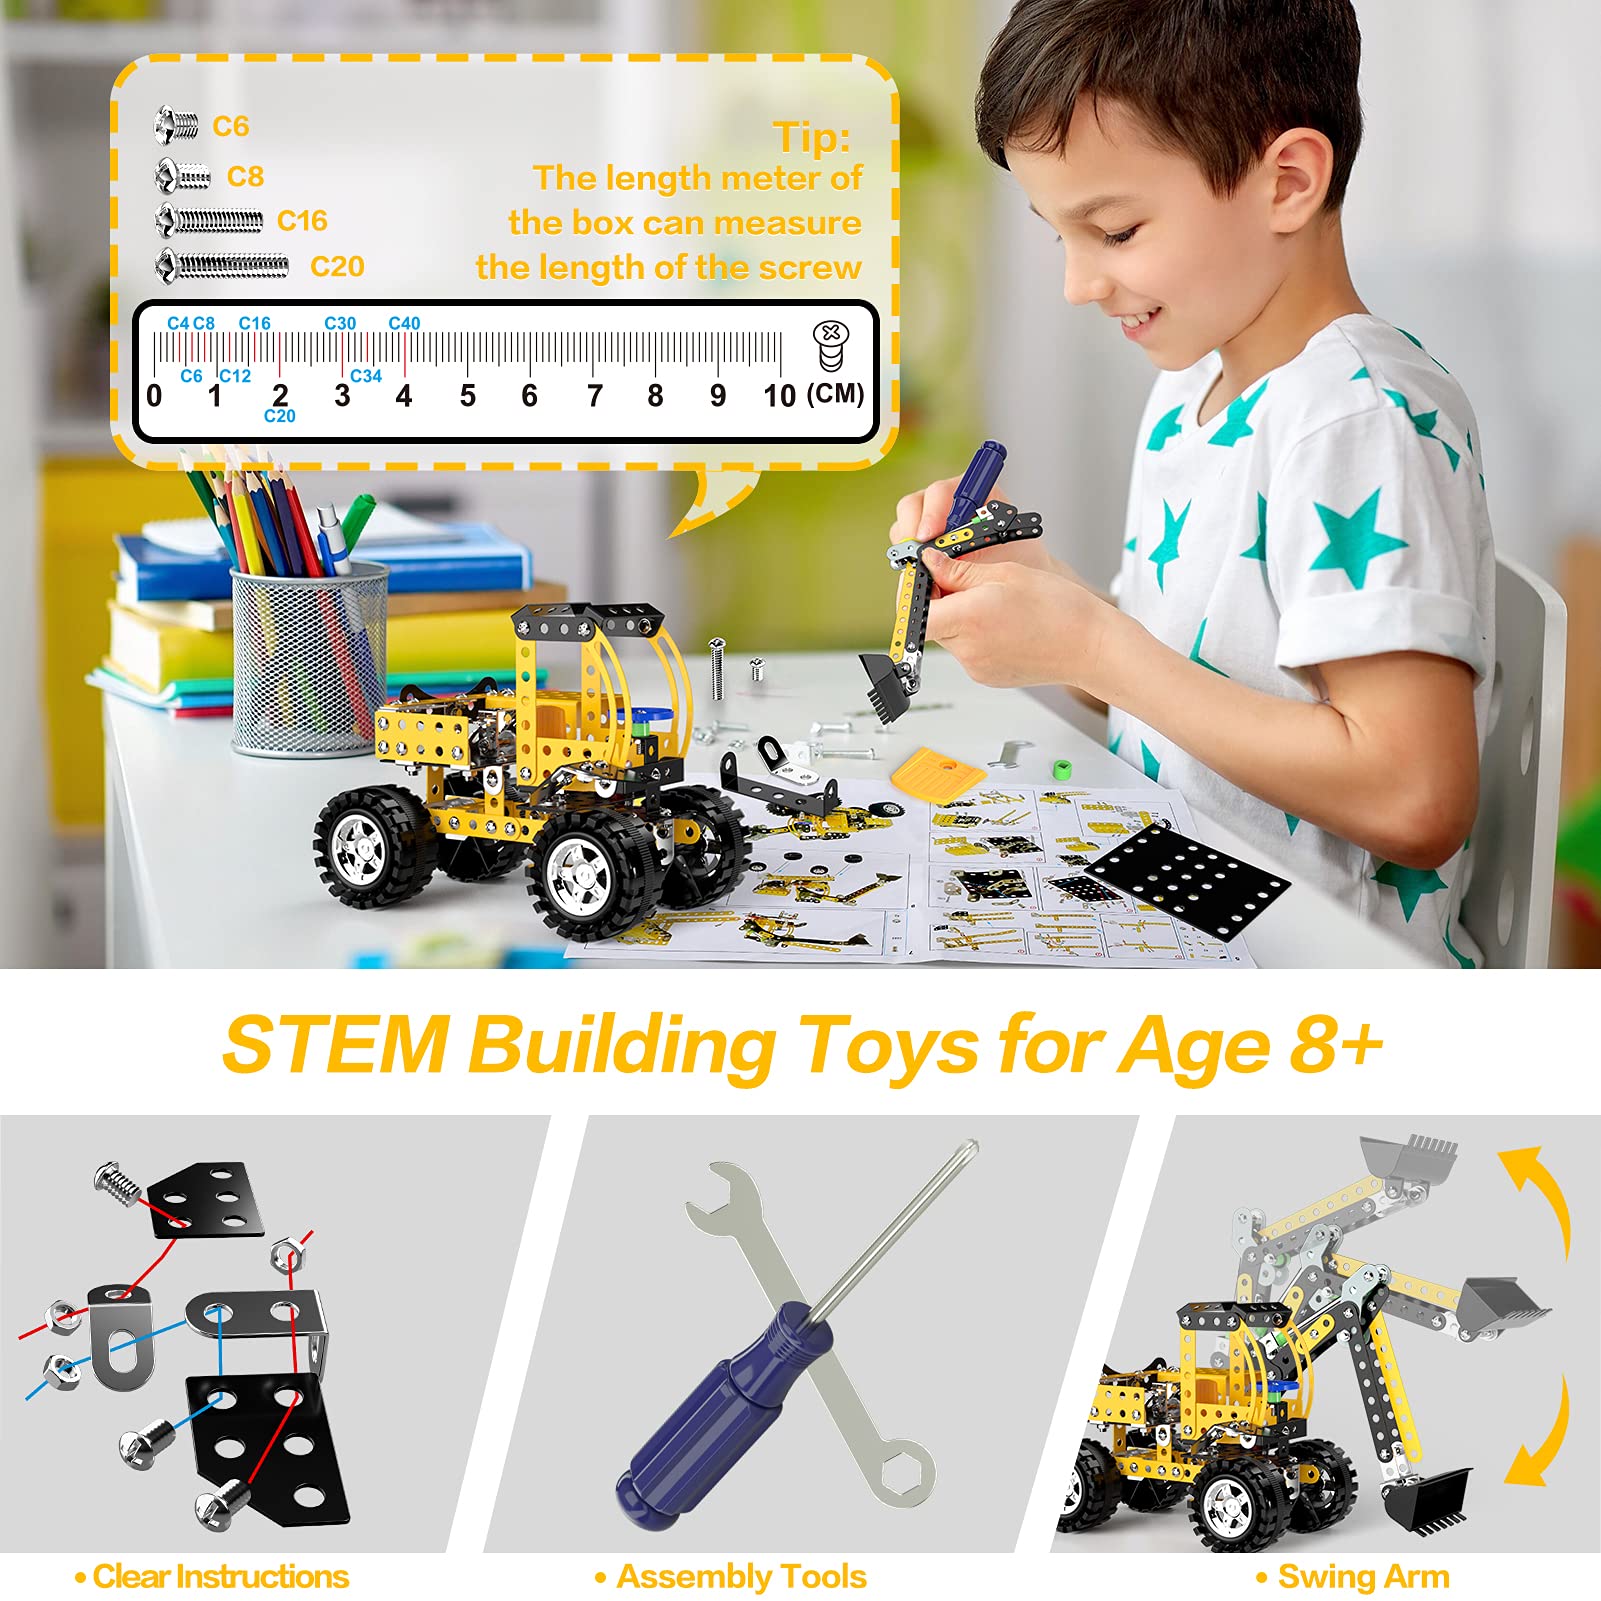 Lucky Doug Stem Building Projects Toys for Kids 8 9 10 11 12+ Year Old, 256 PCS Metal Building Construction Model kit, Engineering Building Blocks DIY Educational Gifts